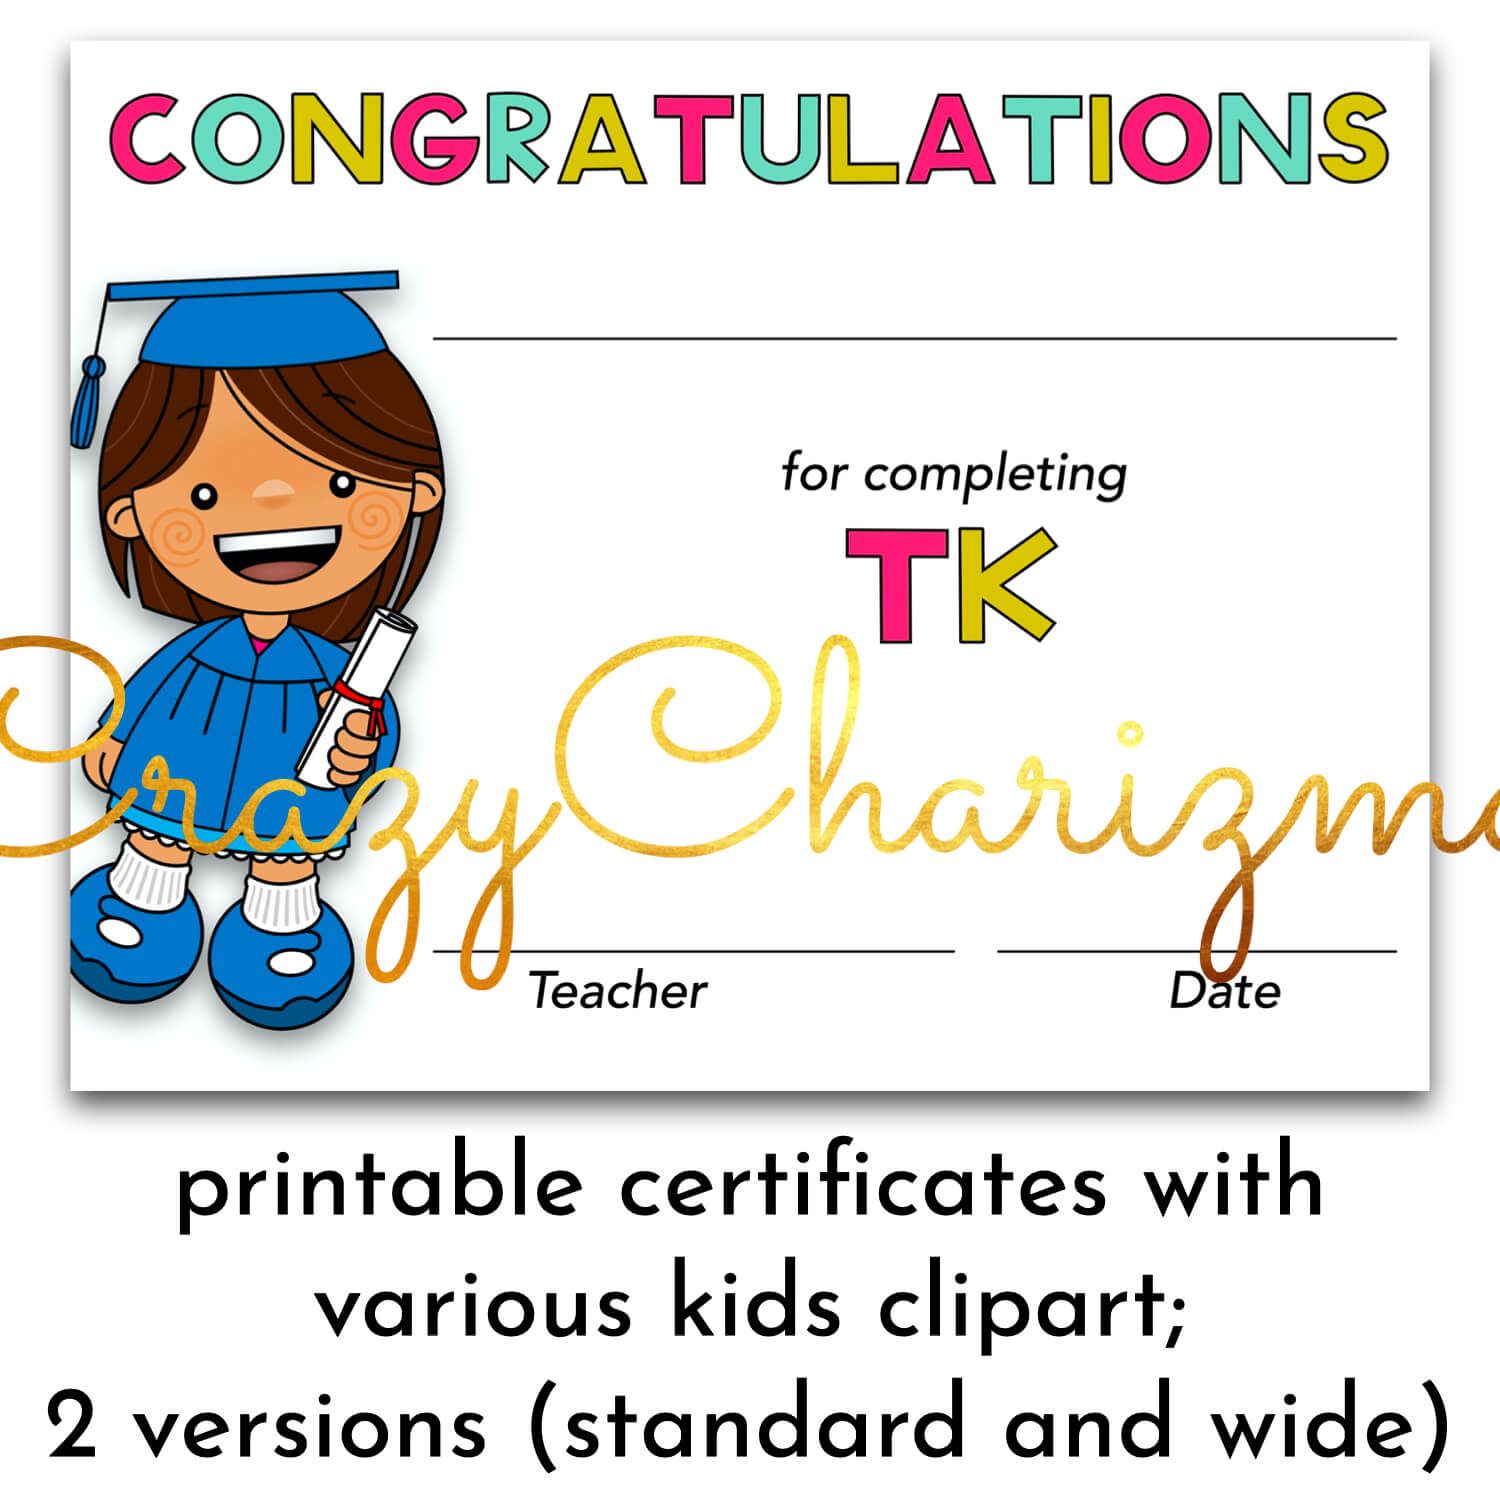 Are you looking for bright graduation certificates for your students? Do they need to be editable? Something perfect for the classroom and distance learning? You've found them!